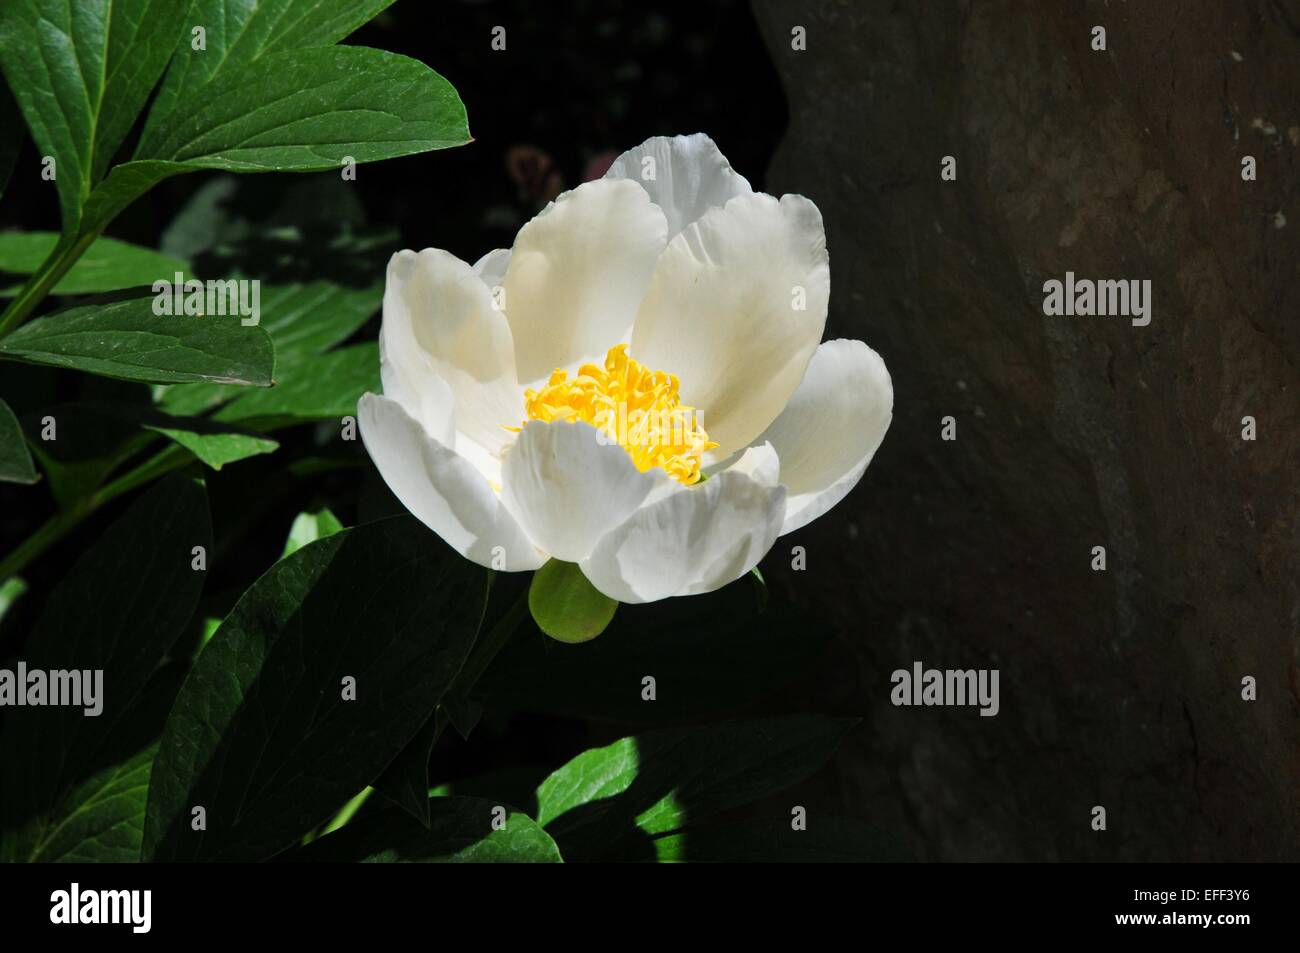 White Rose seeming to float in a black background. Stock Photo